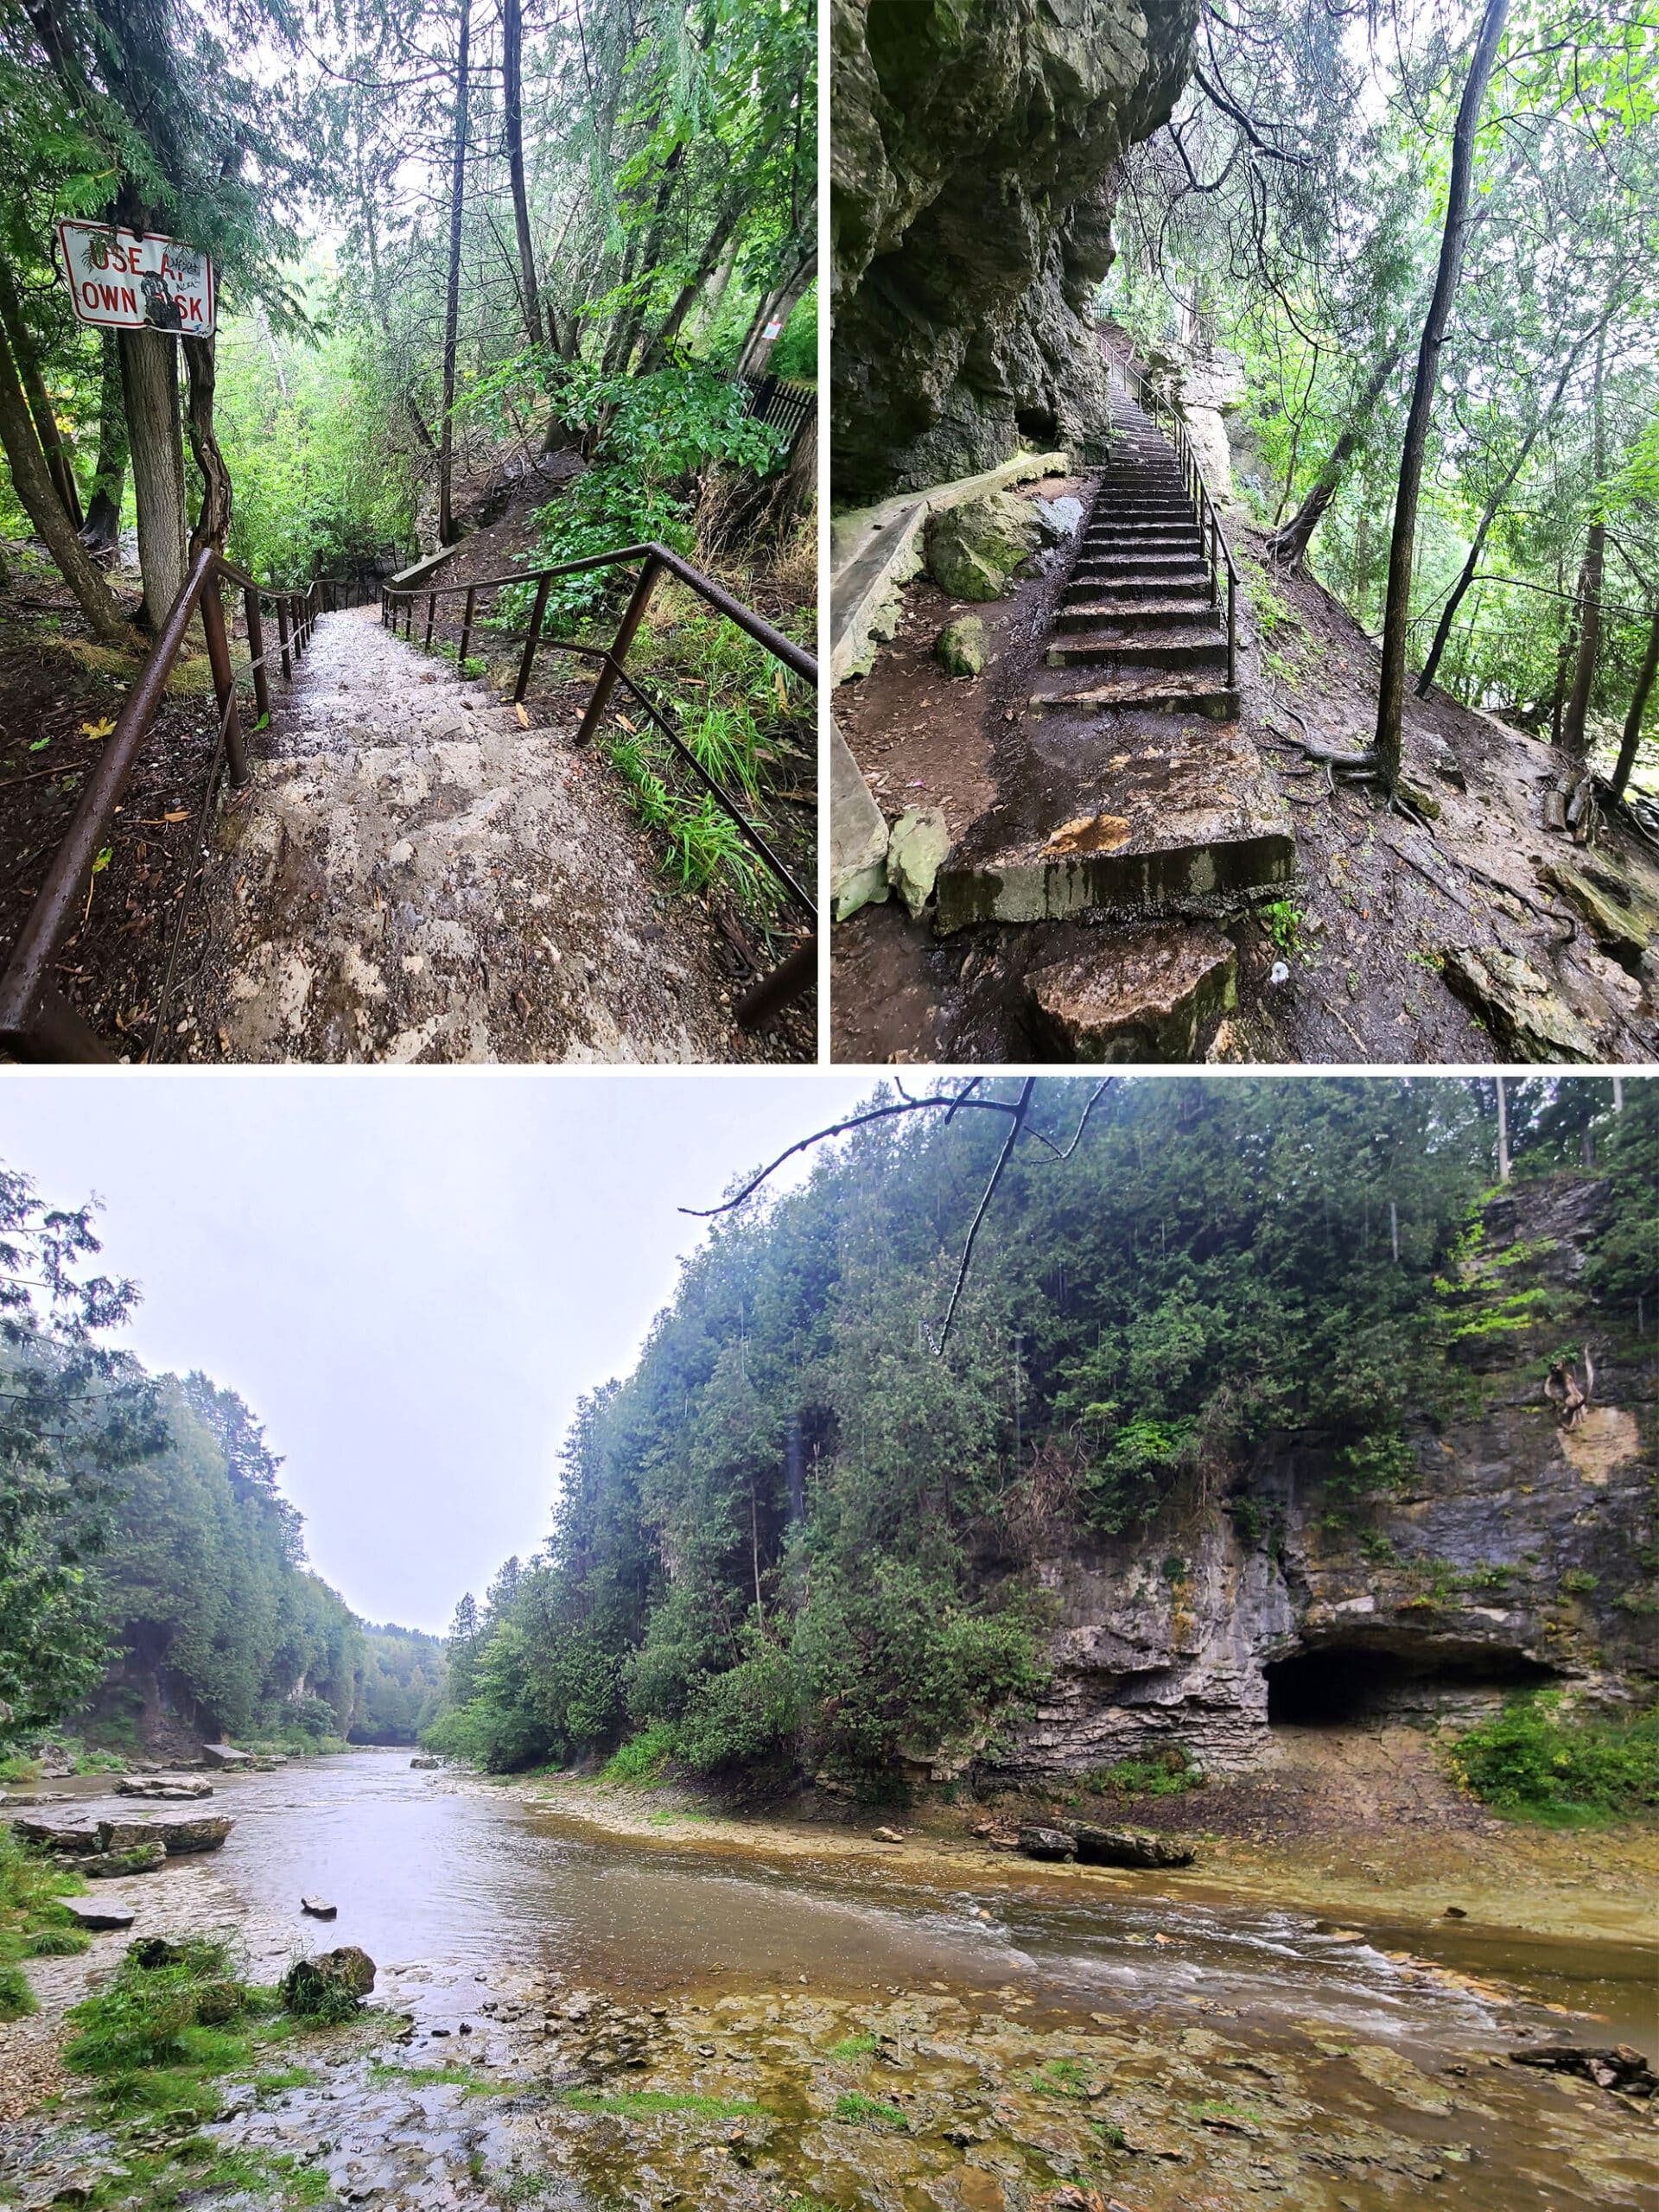 A 3 part image showing various view from Victoria Park in elora, including stairs and a view from the bottom of the gorge.